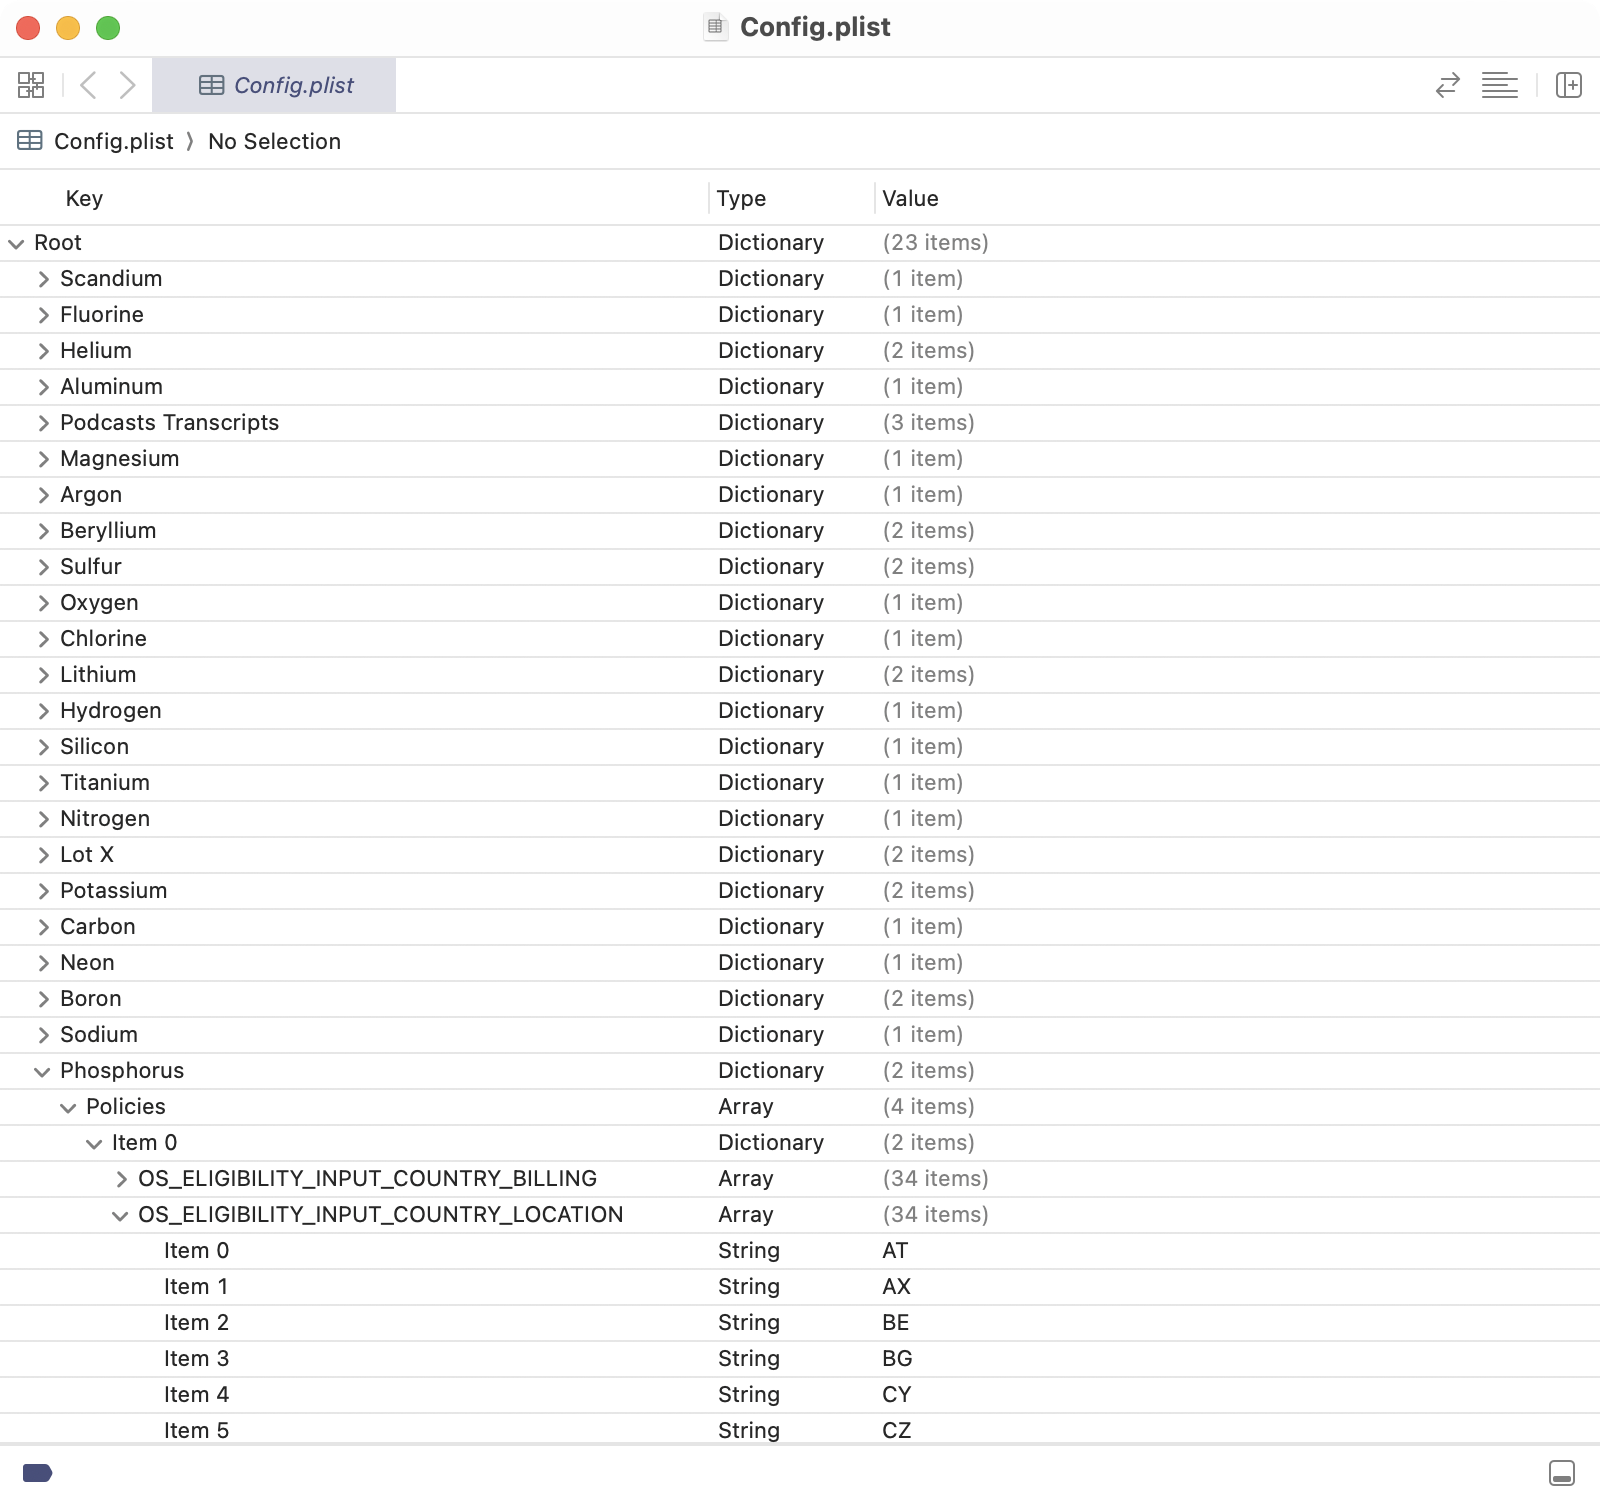 Screenshot of a file called Config.plist open in Xcode. It shows 23 items, which are the first 22 elements on the periodic table, plus “Lot X” and “Podcasts Transcripts”. Phosphorus is expanded to show an array named Policies. It has a sub-key named OS_ELIGIBILITY_INPUT_COUNTRY_LOCATION, with 34 two-character country codes underneath it. (It’s one short because Calcium is missing.)